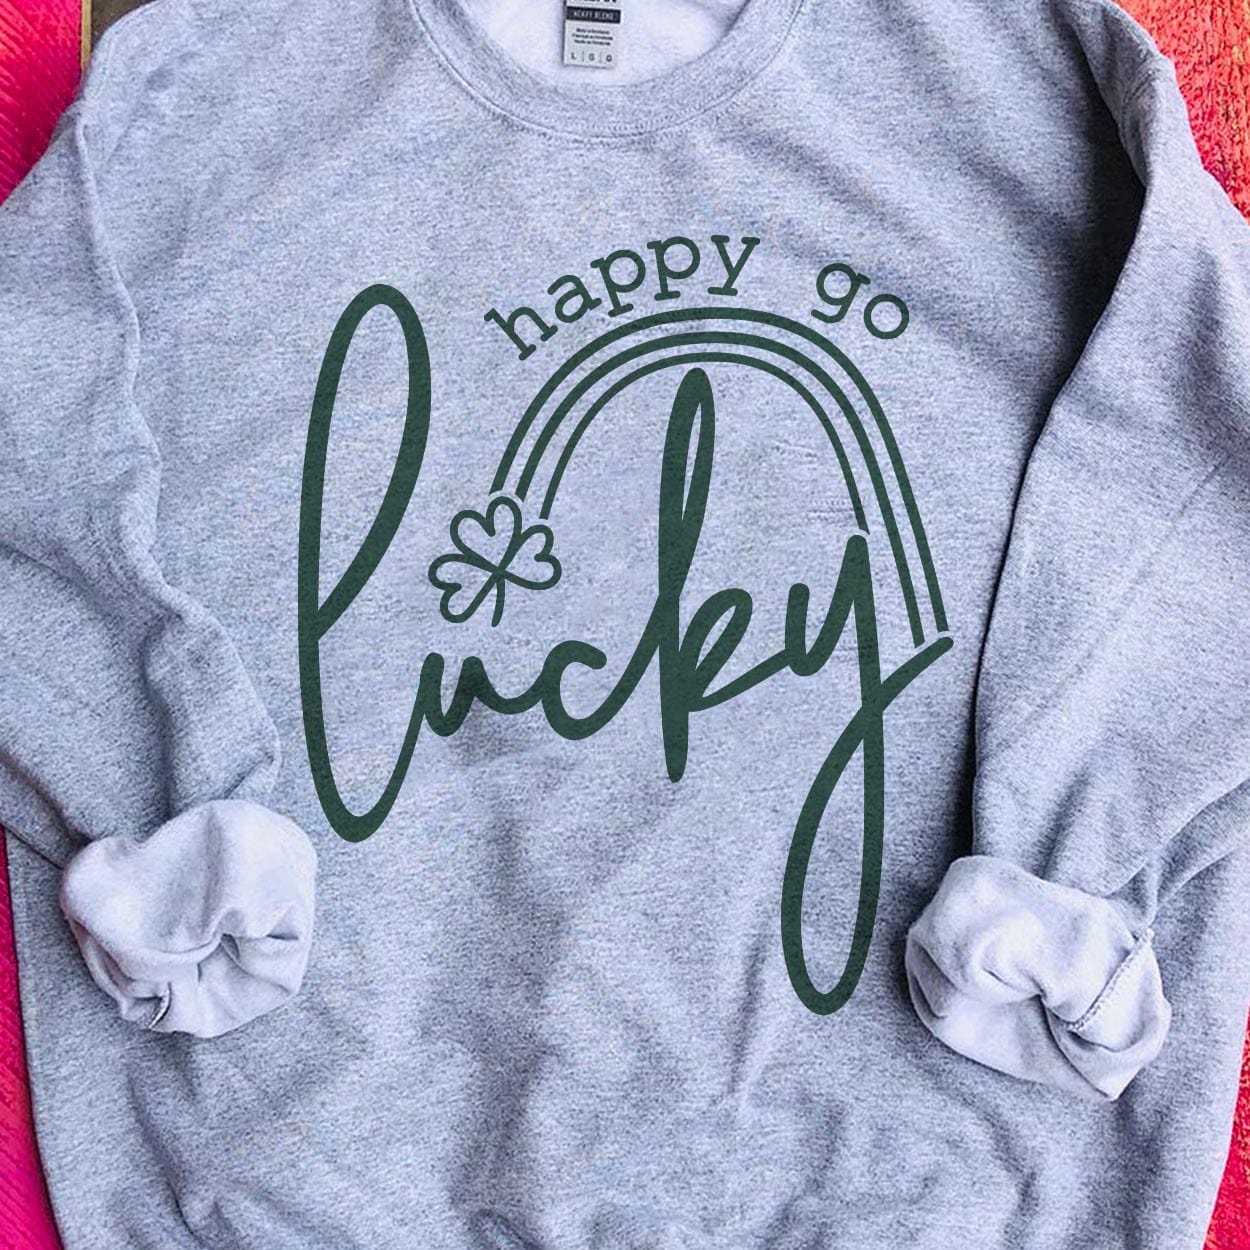 A gray crew neck sweatshirt featuring the words "Happy go lucky". "Lucky" being in the center in cursive while "happy go" is above "lucky" in a smaller font. Between the two is a small rainbow with a clover at the end. Item is pictured on a pink background.